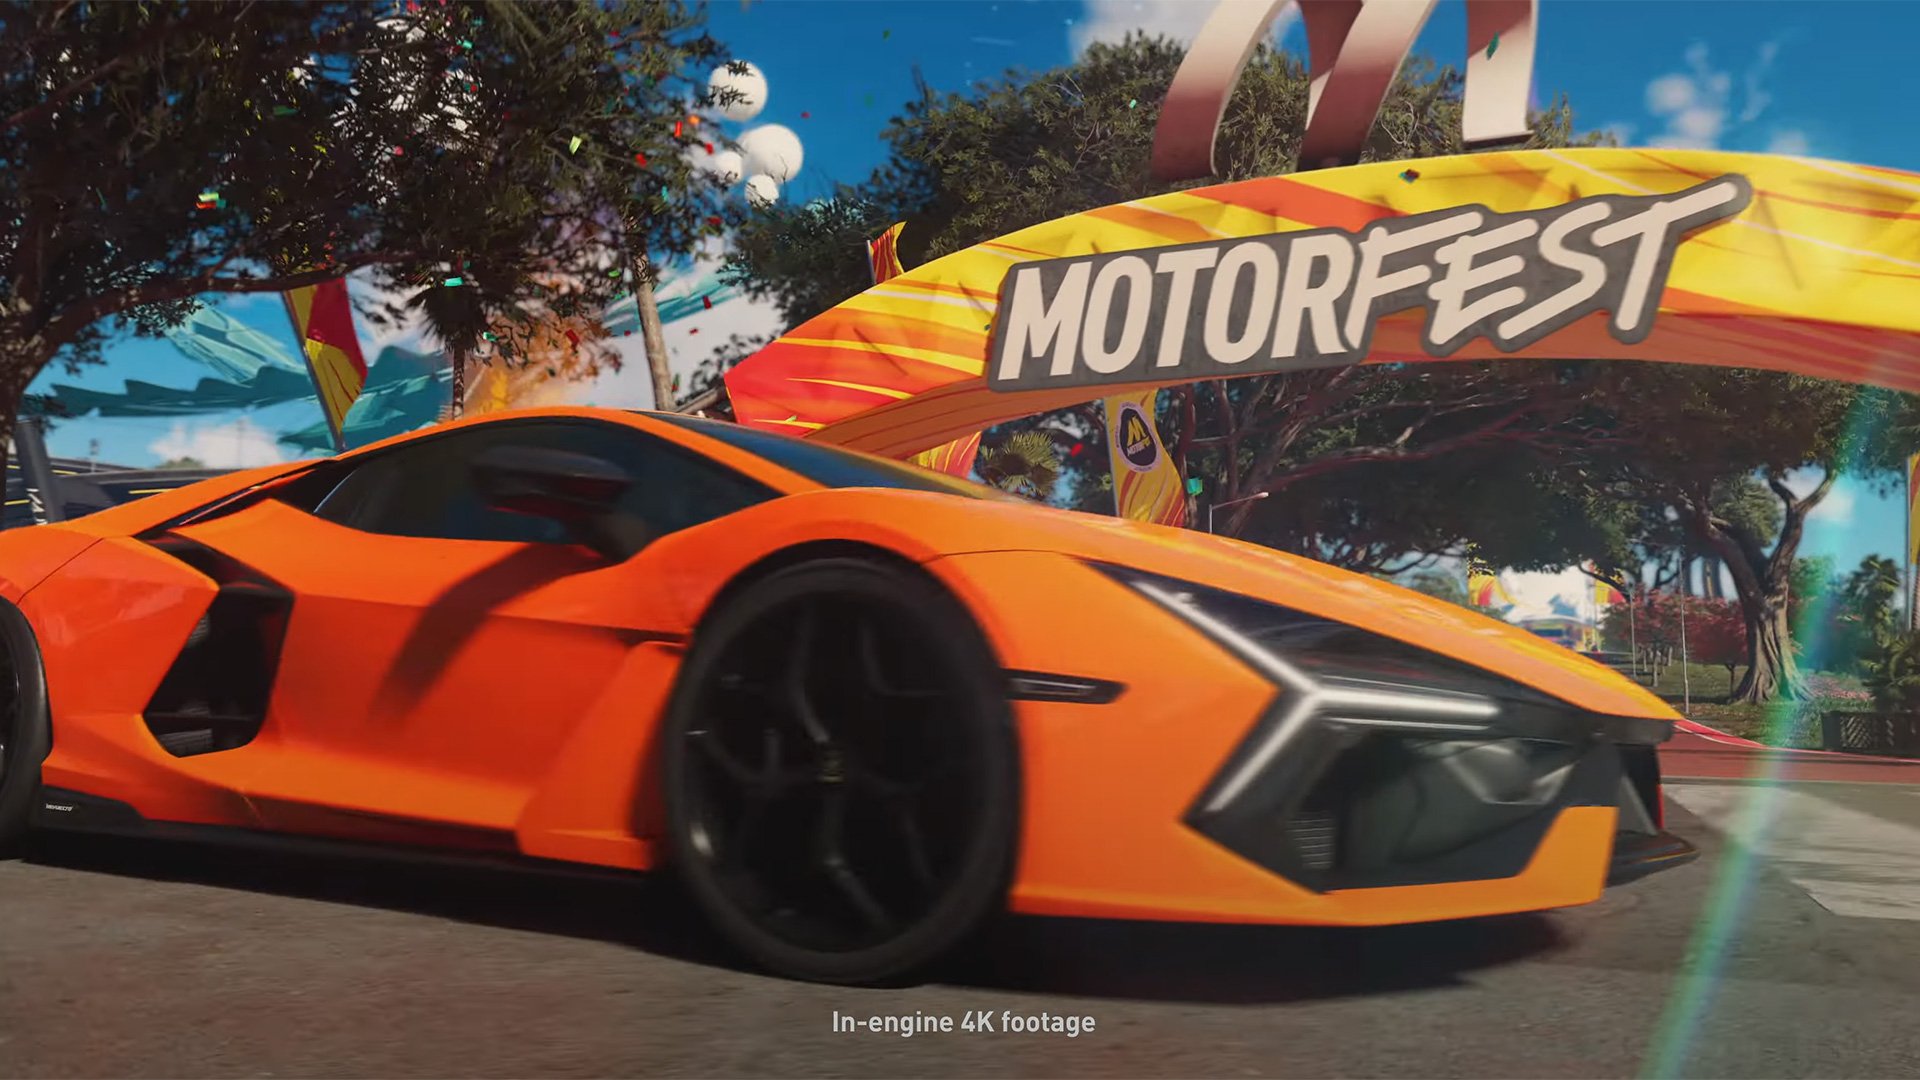 The Crew Motorfest (Closed BETA) - Preview